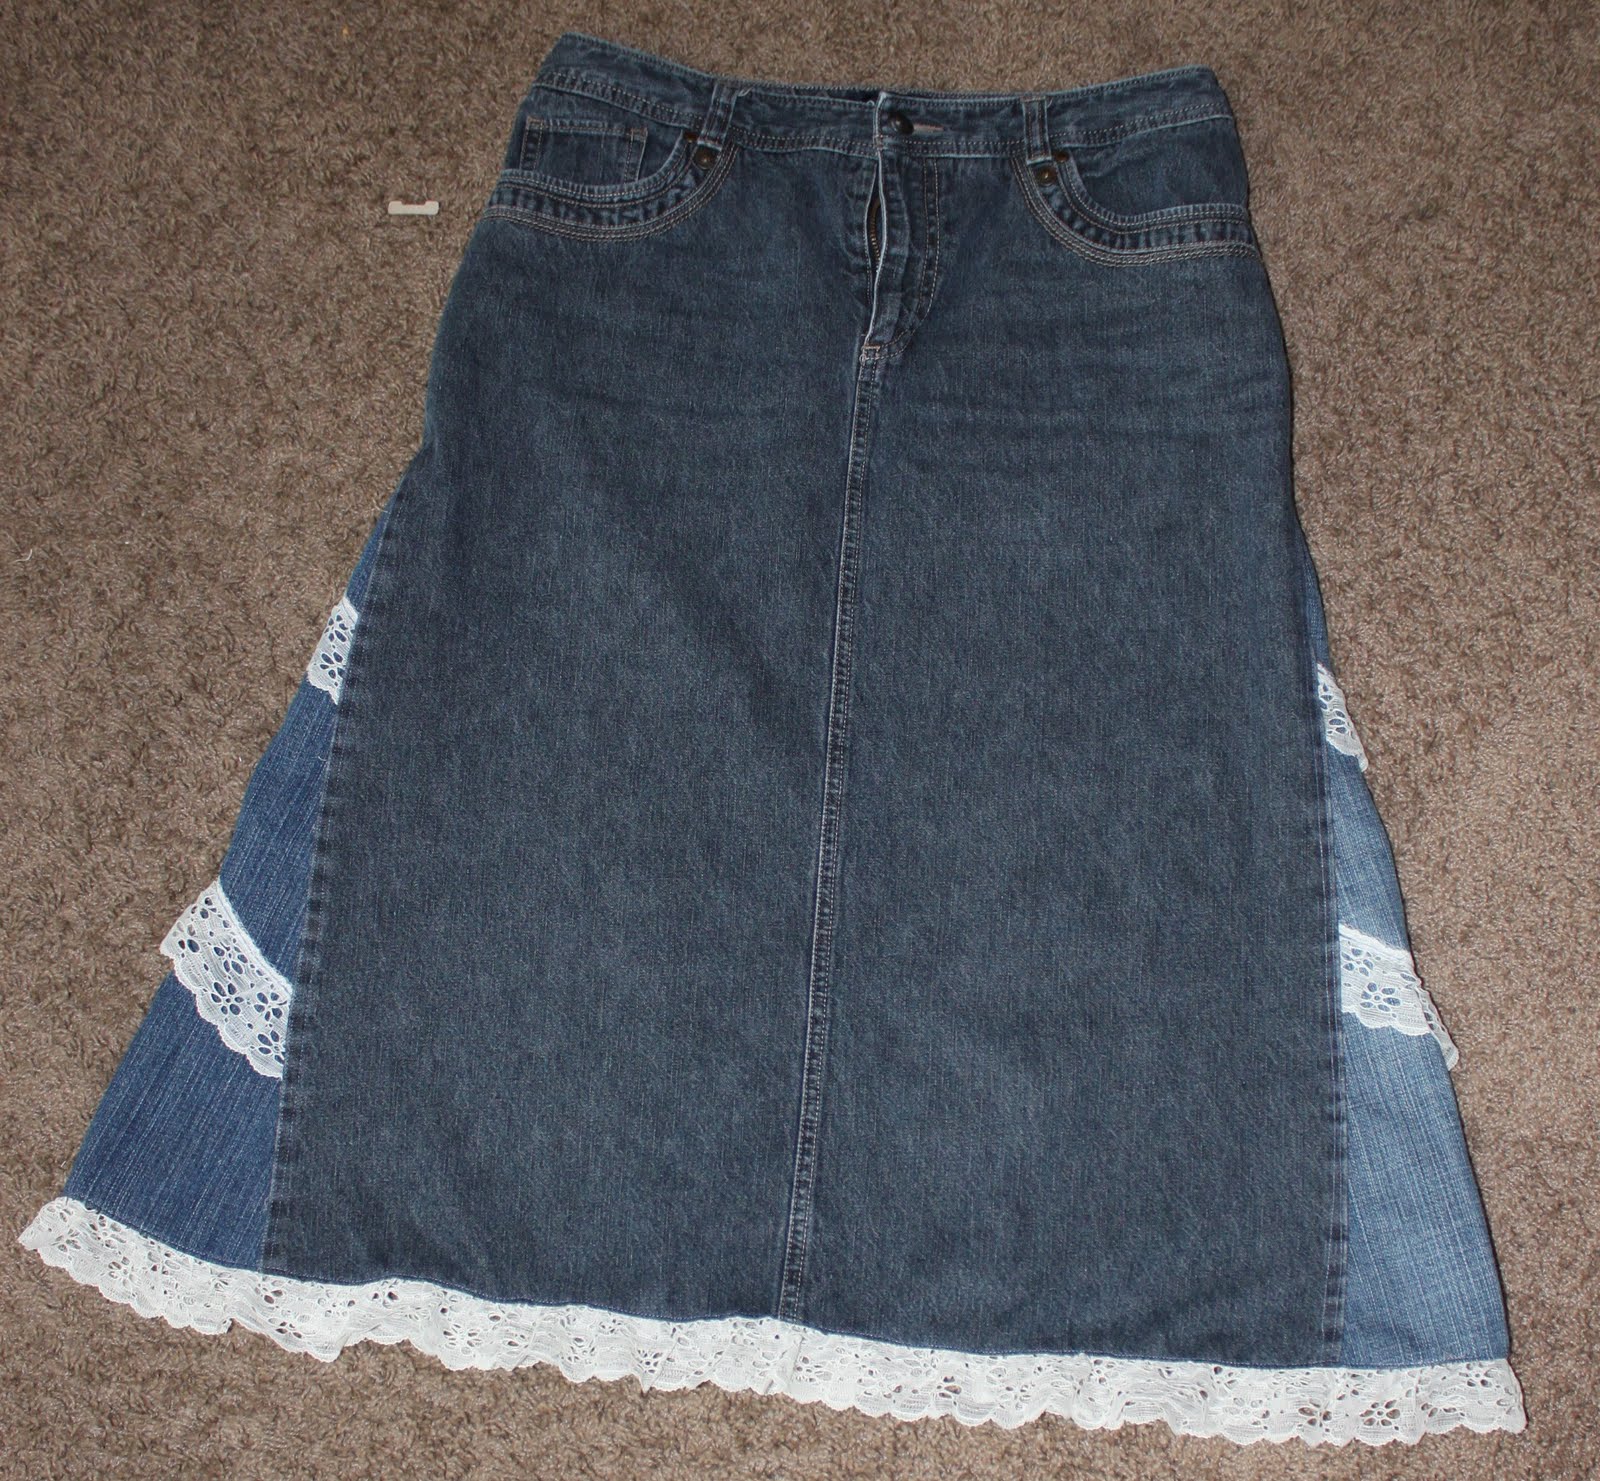 They Still Make Sewing Machines Boutique: Recycled Ladies Denim Skirt